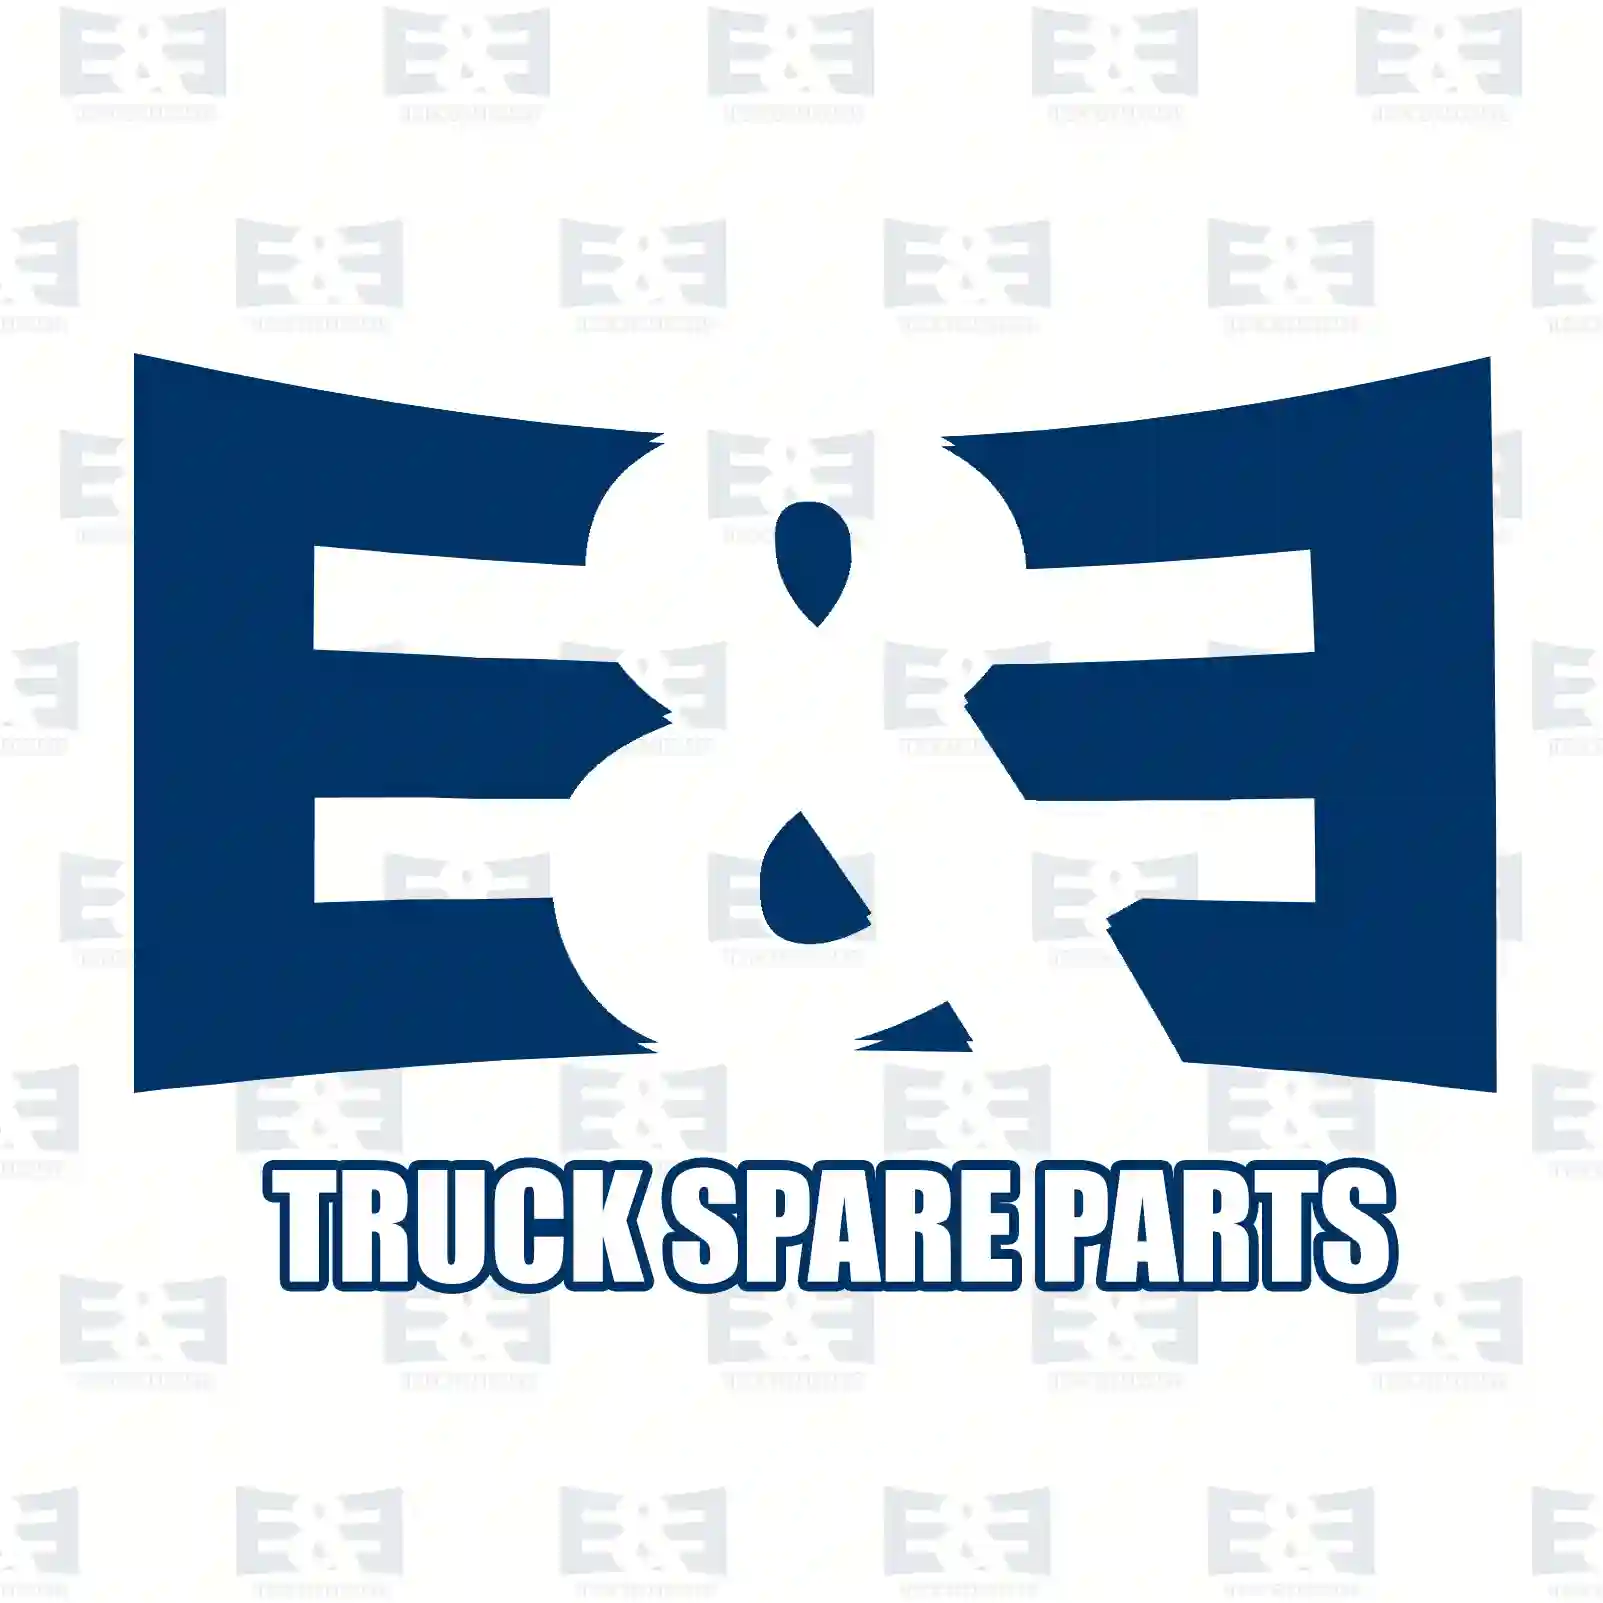  Coupling ring || E&E Truck Spare Parts | Truck Spare Parts, Auotomotive Spare Parts